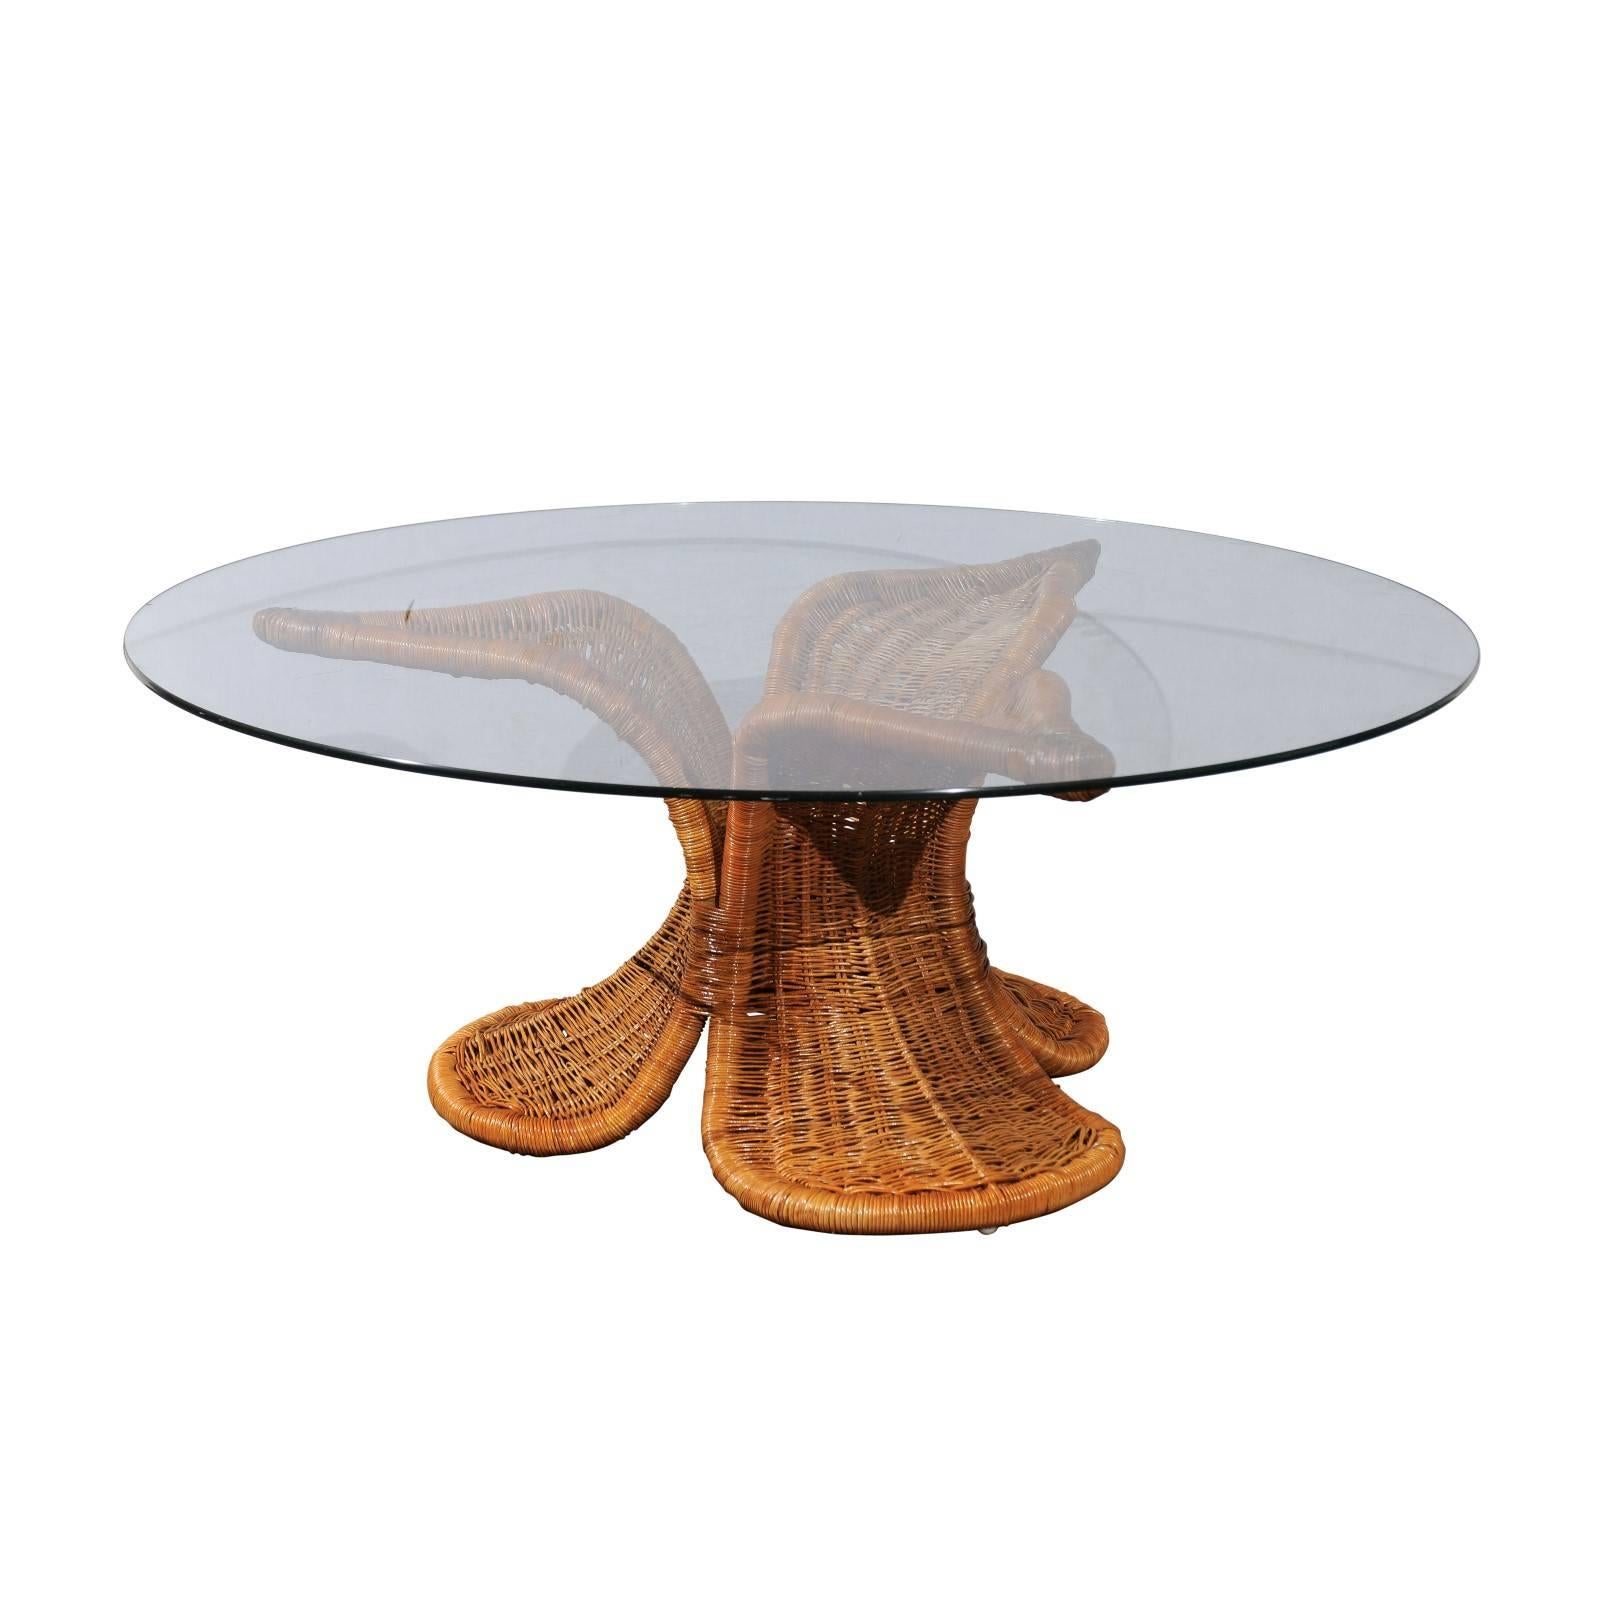 A stunning Lotus style coffee table, circa 1975. Stout metal frame painstakingly wrapped in wicker. Exceptional design and quality aged to absolute perfection. The base is designed to support a much larger and heavier piece of glass, if a larger